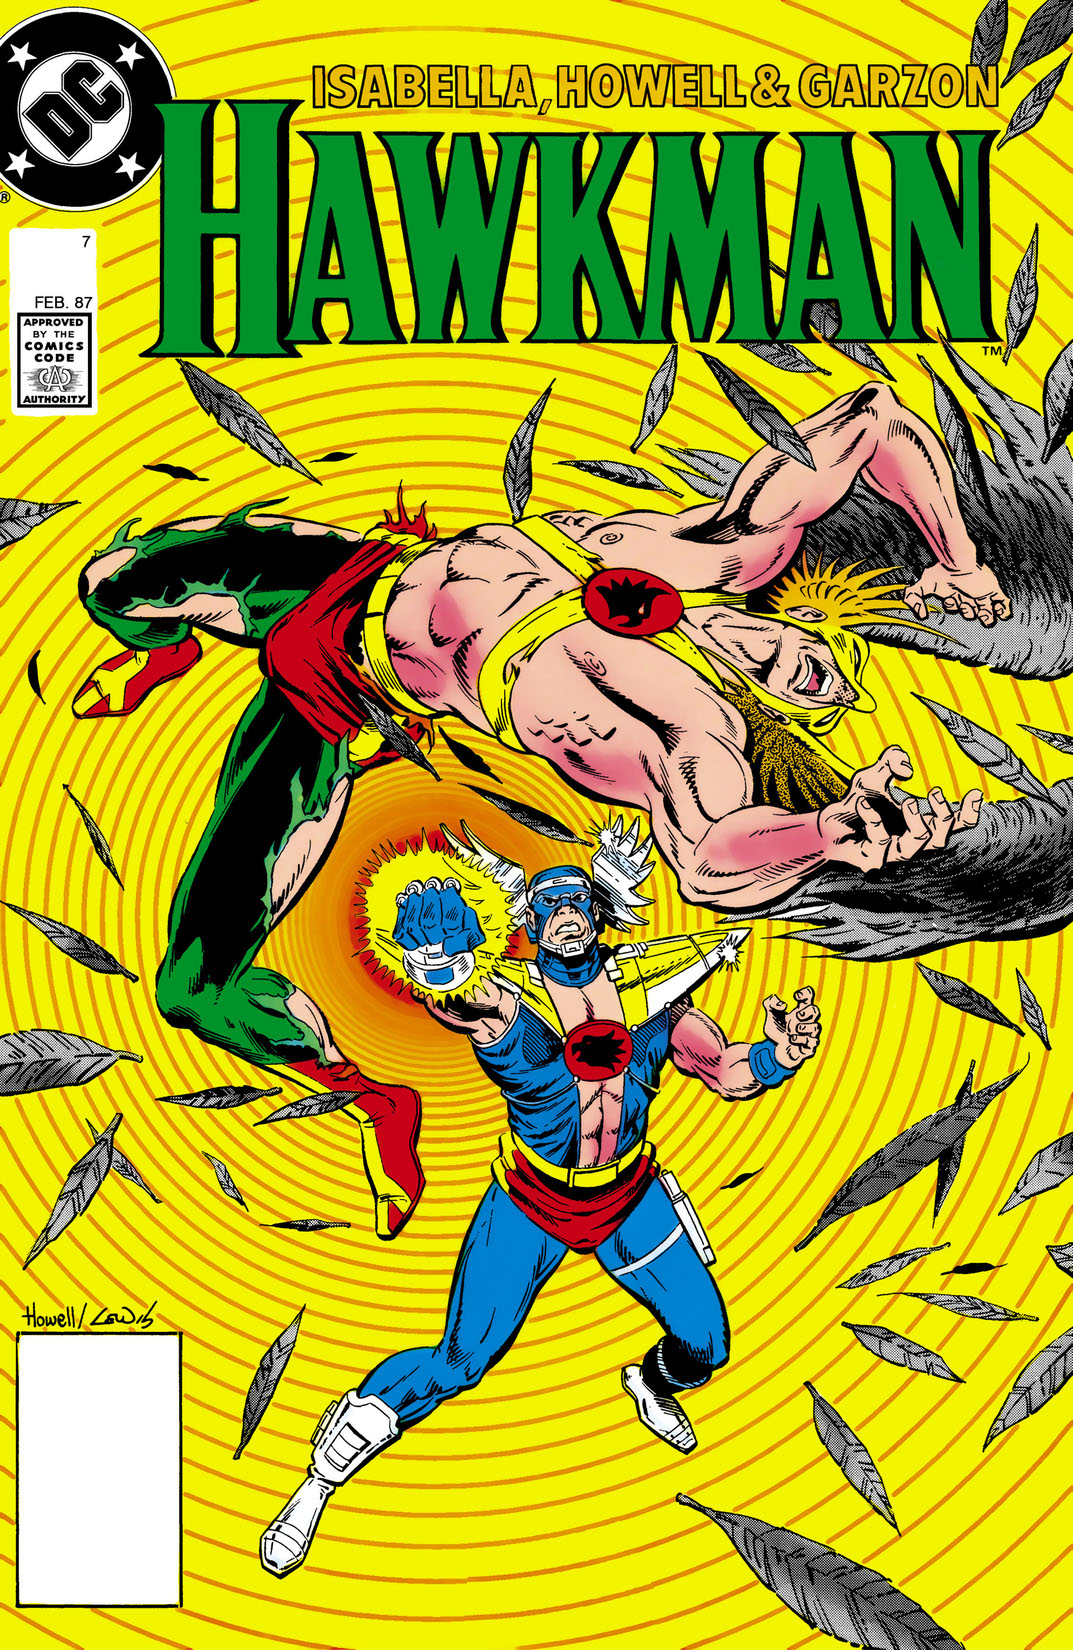 Hawkman (1986-) #7 preview images